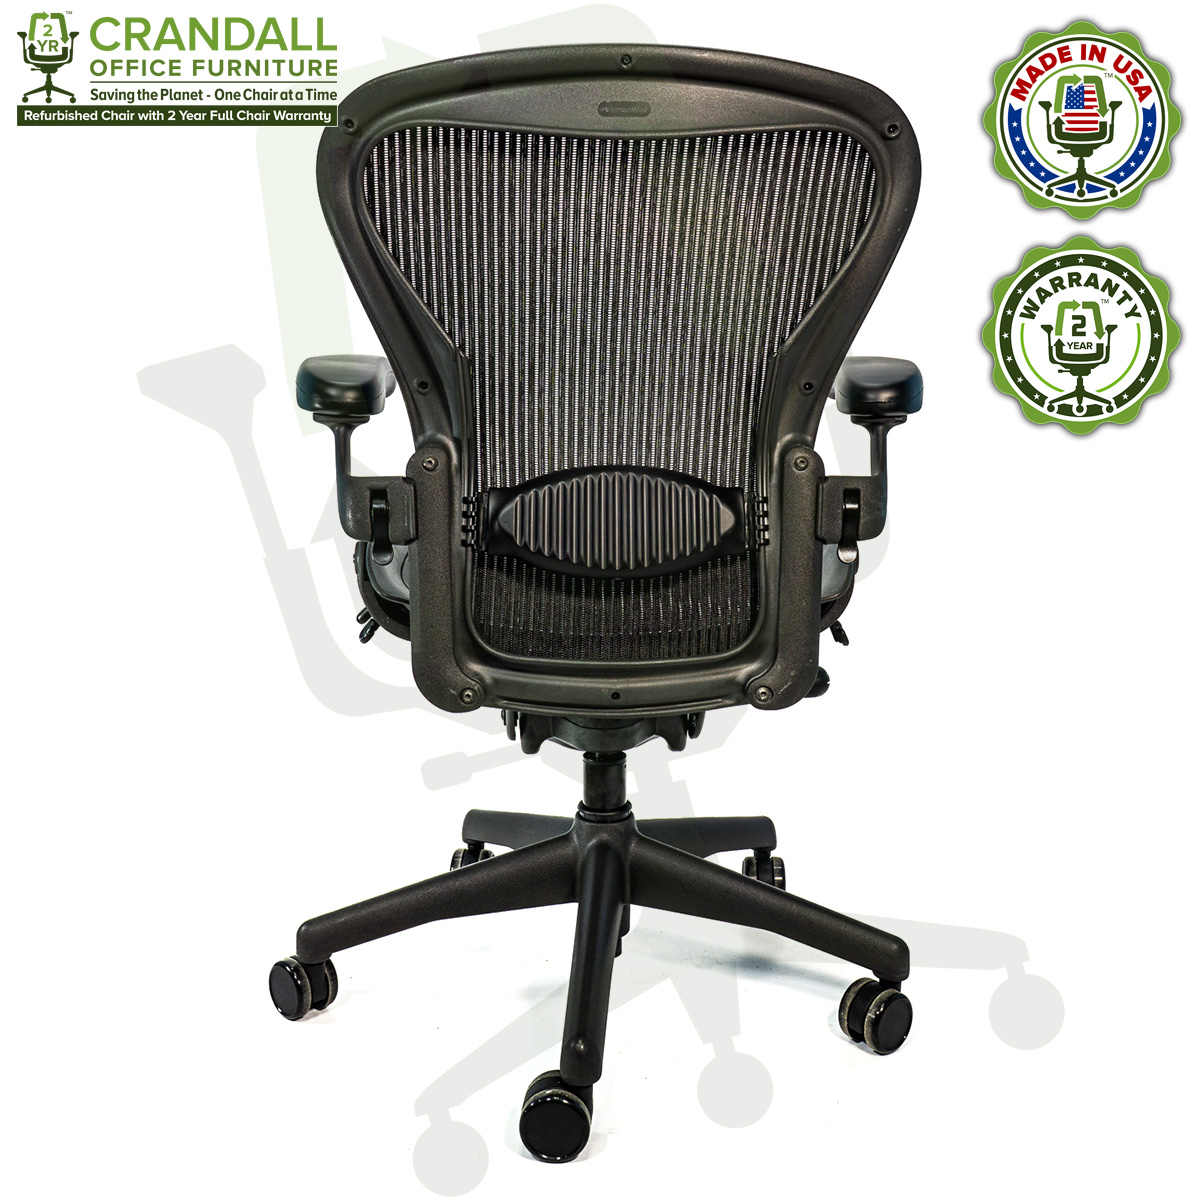 Crandall Office Furniture Refurbished Herman Miller Aeron Chair with 12 Year Warranty - 06